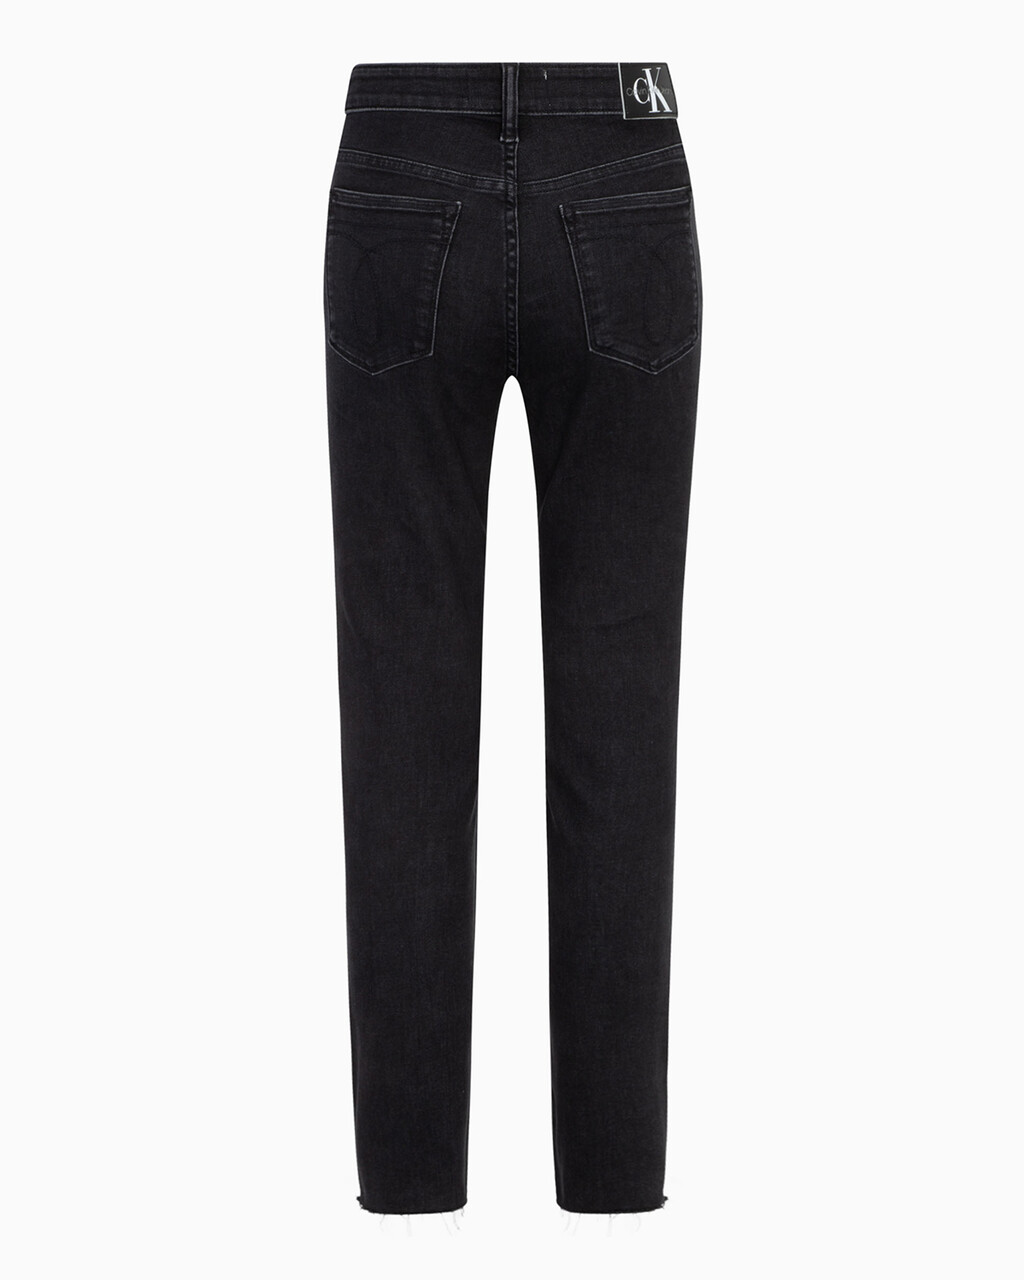 37.5 RECONSIDERED HIGH RISE SKINNY ANKLE JEANS, Black Rwh, hi-res